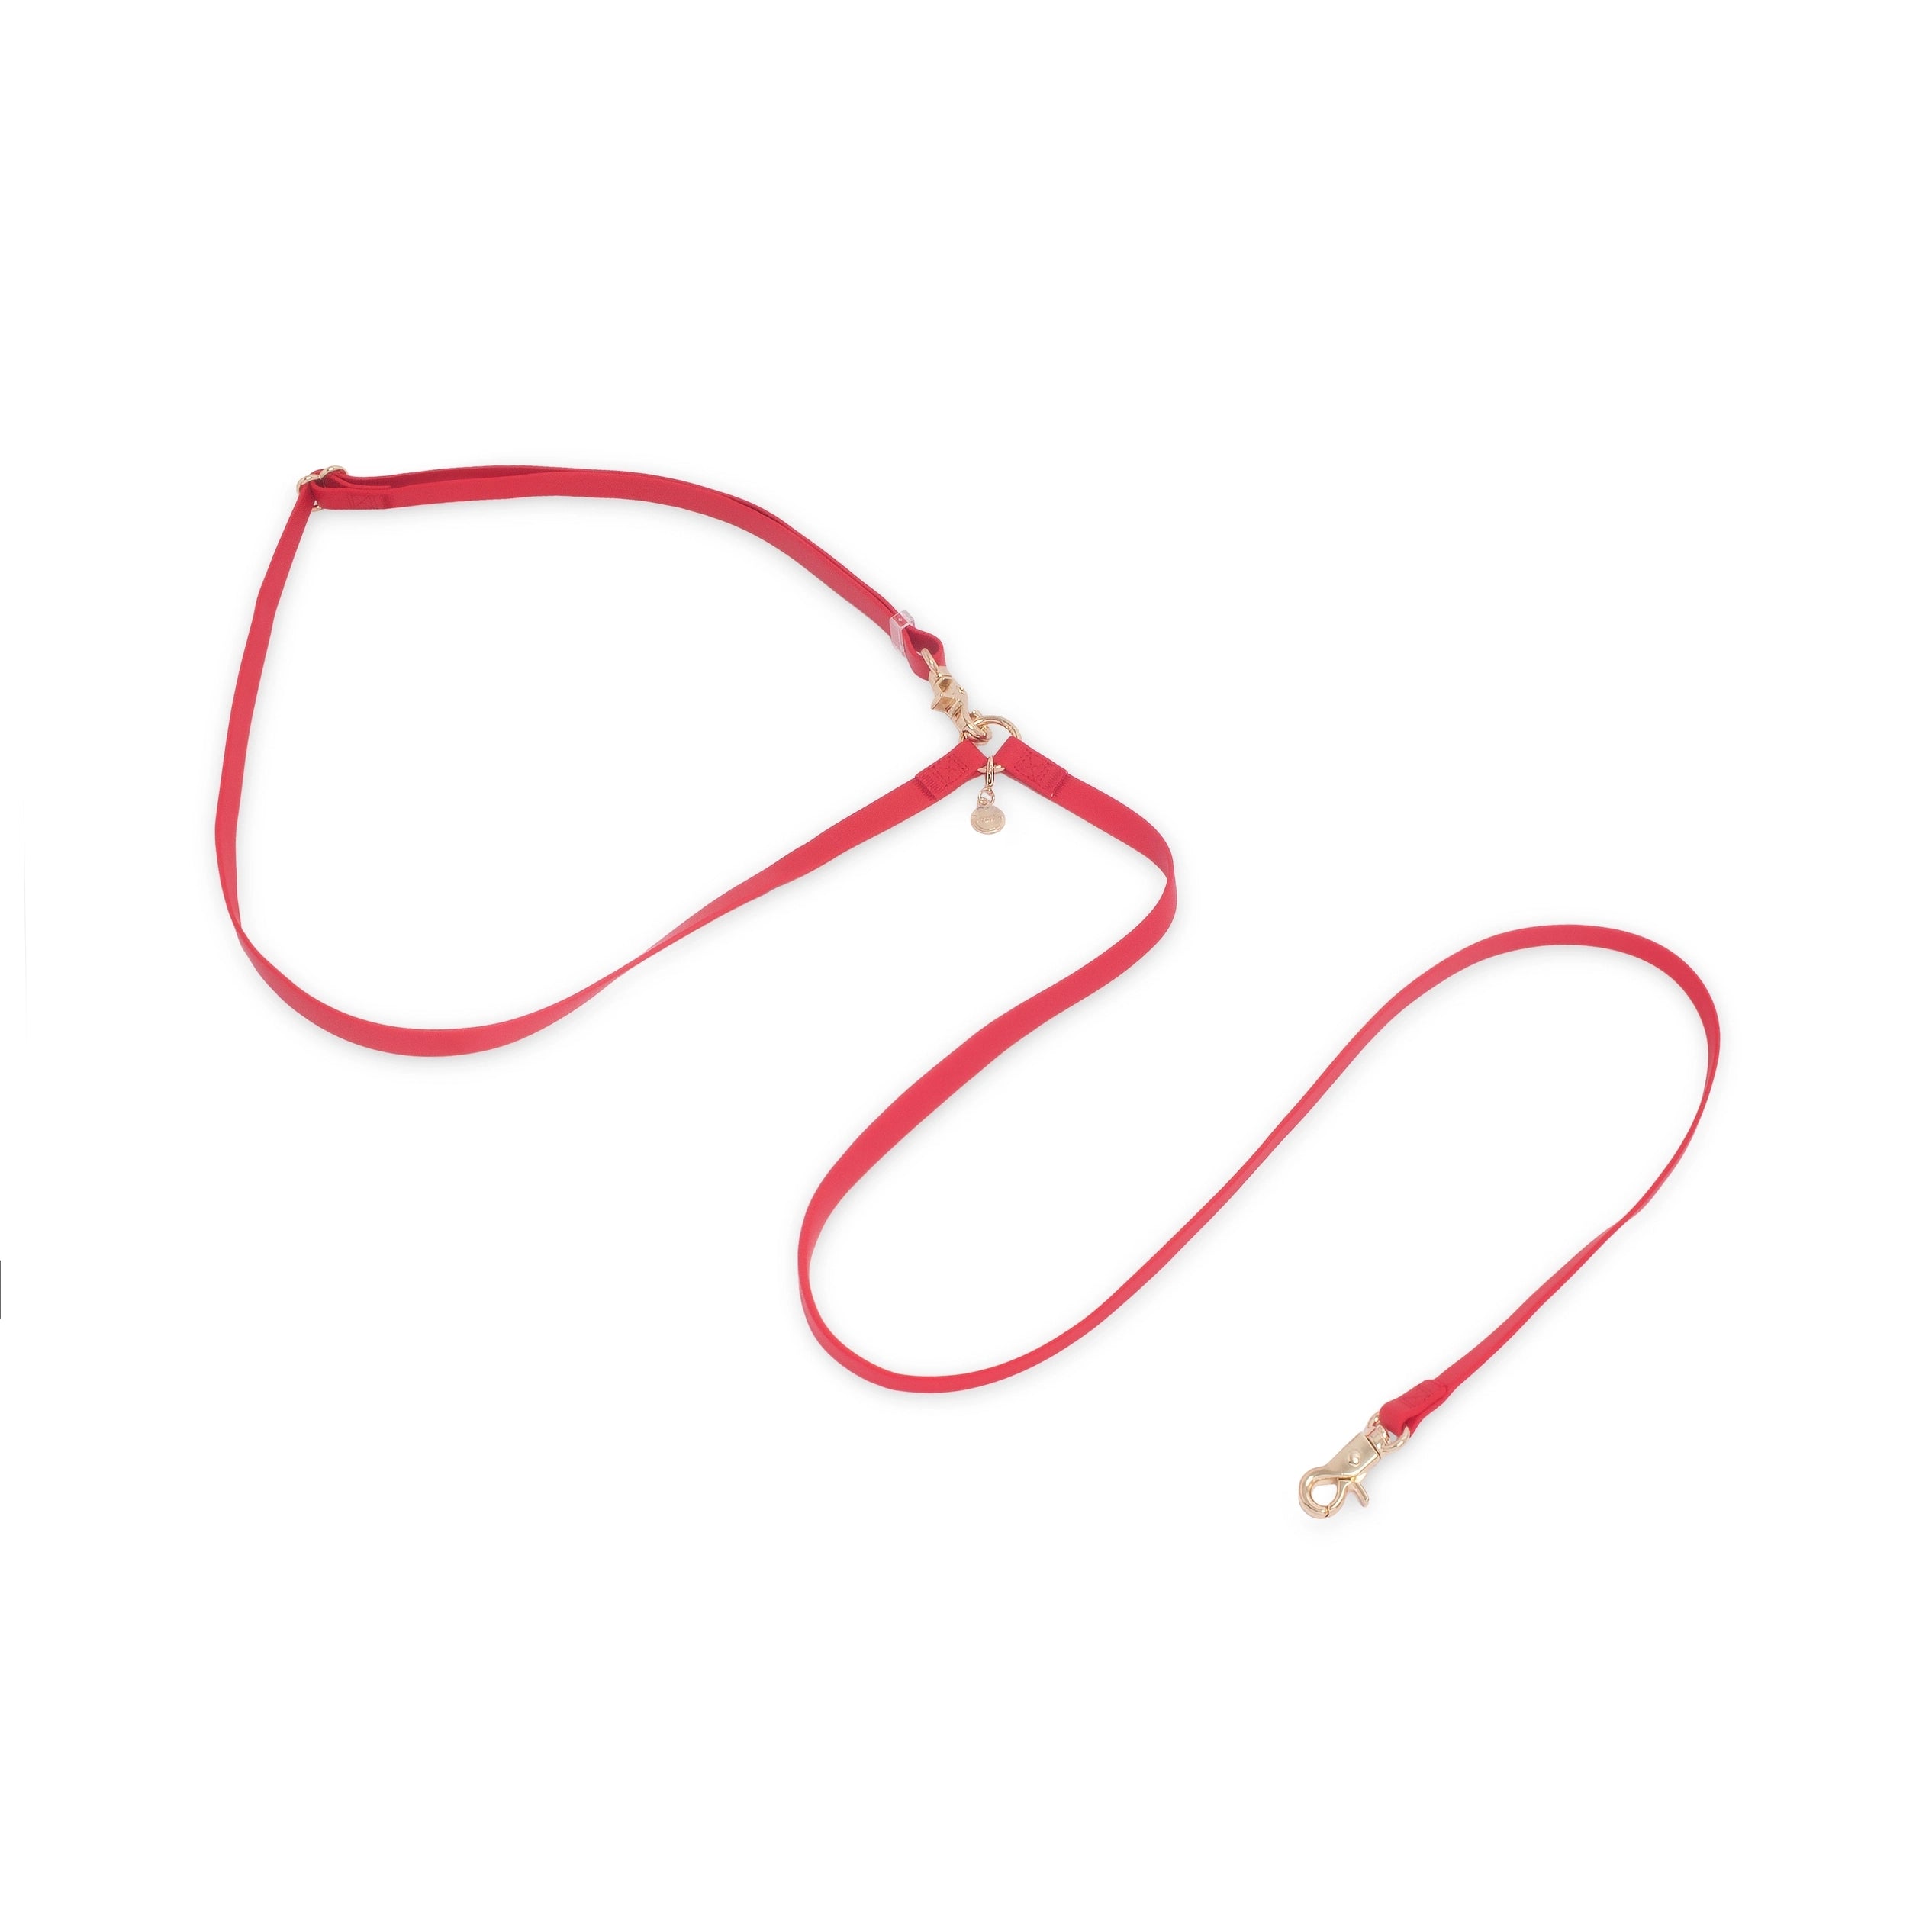 4-in-1 Convertible Hands Free Dog Leash - Cherry Red